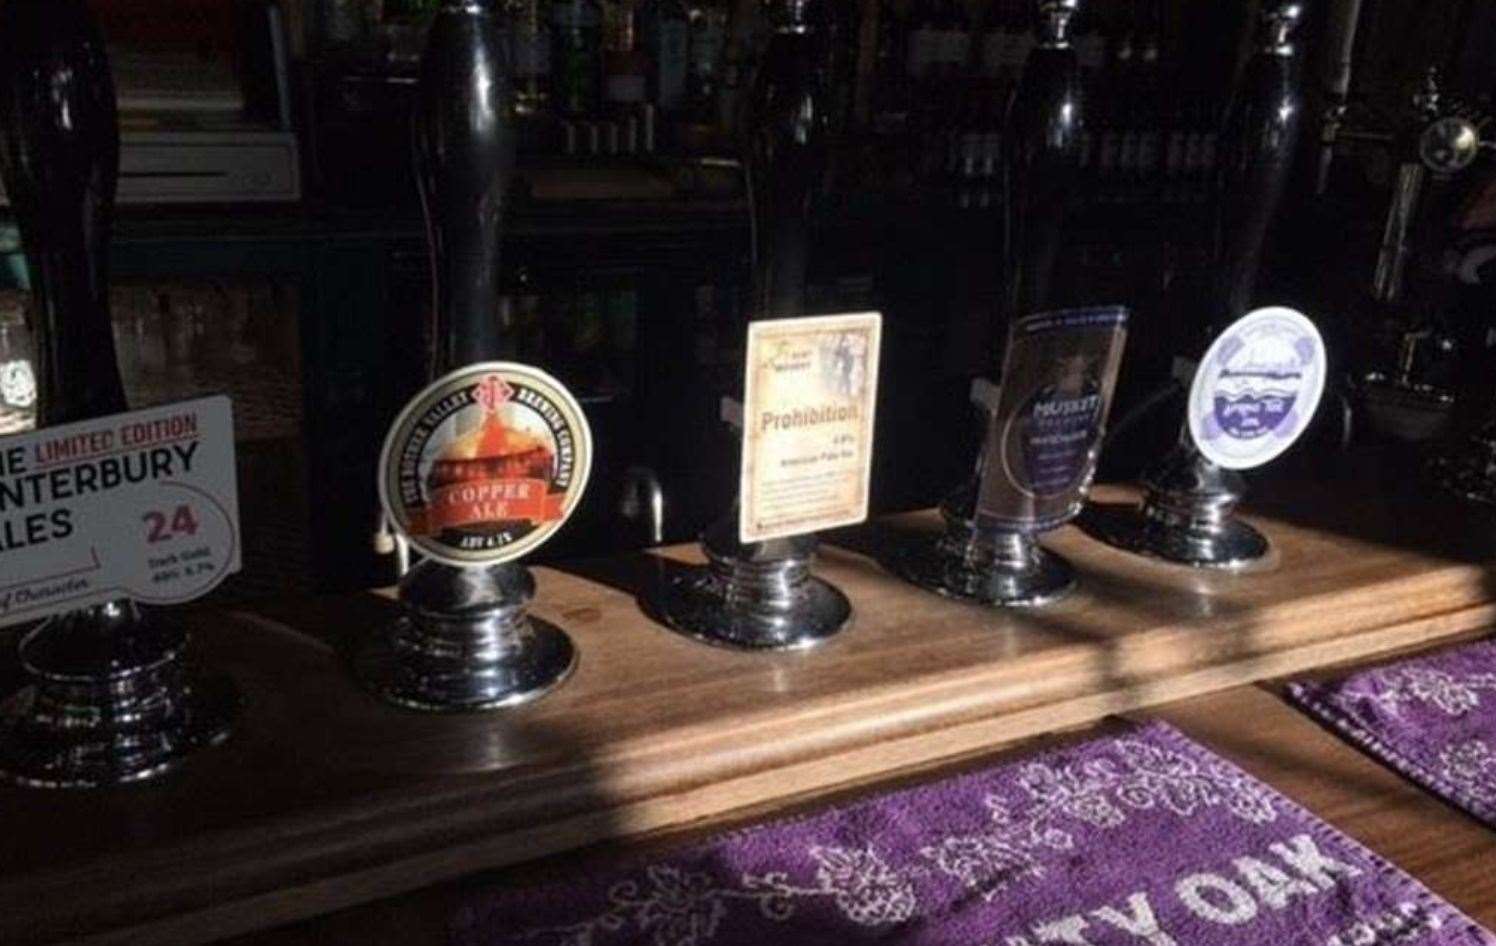 The Elephant pub in Faversham has a wide variety of beers on tap – but no Shepherd Neame offerings